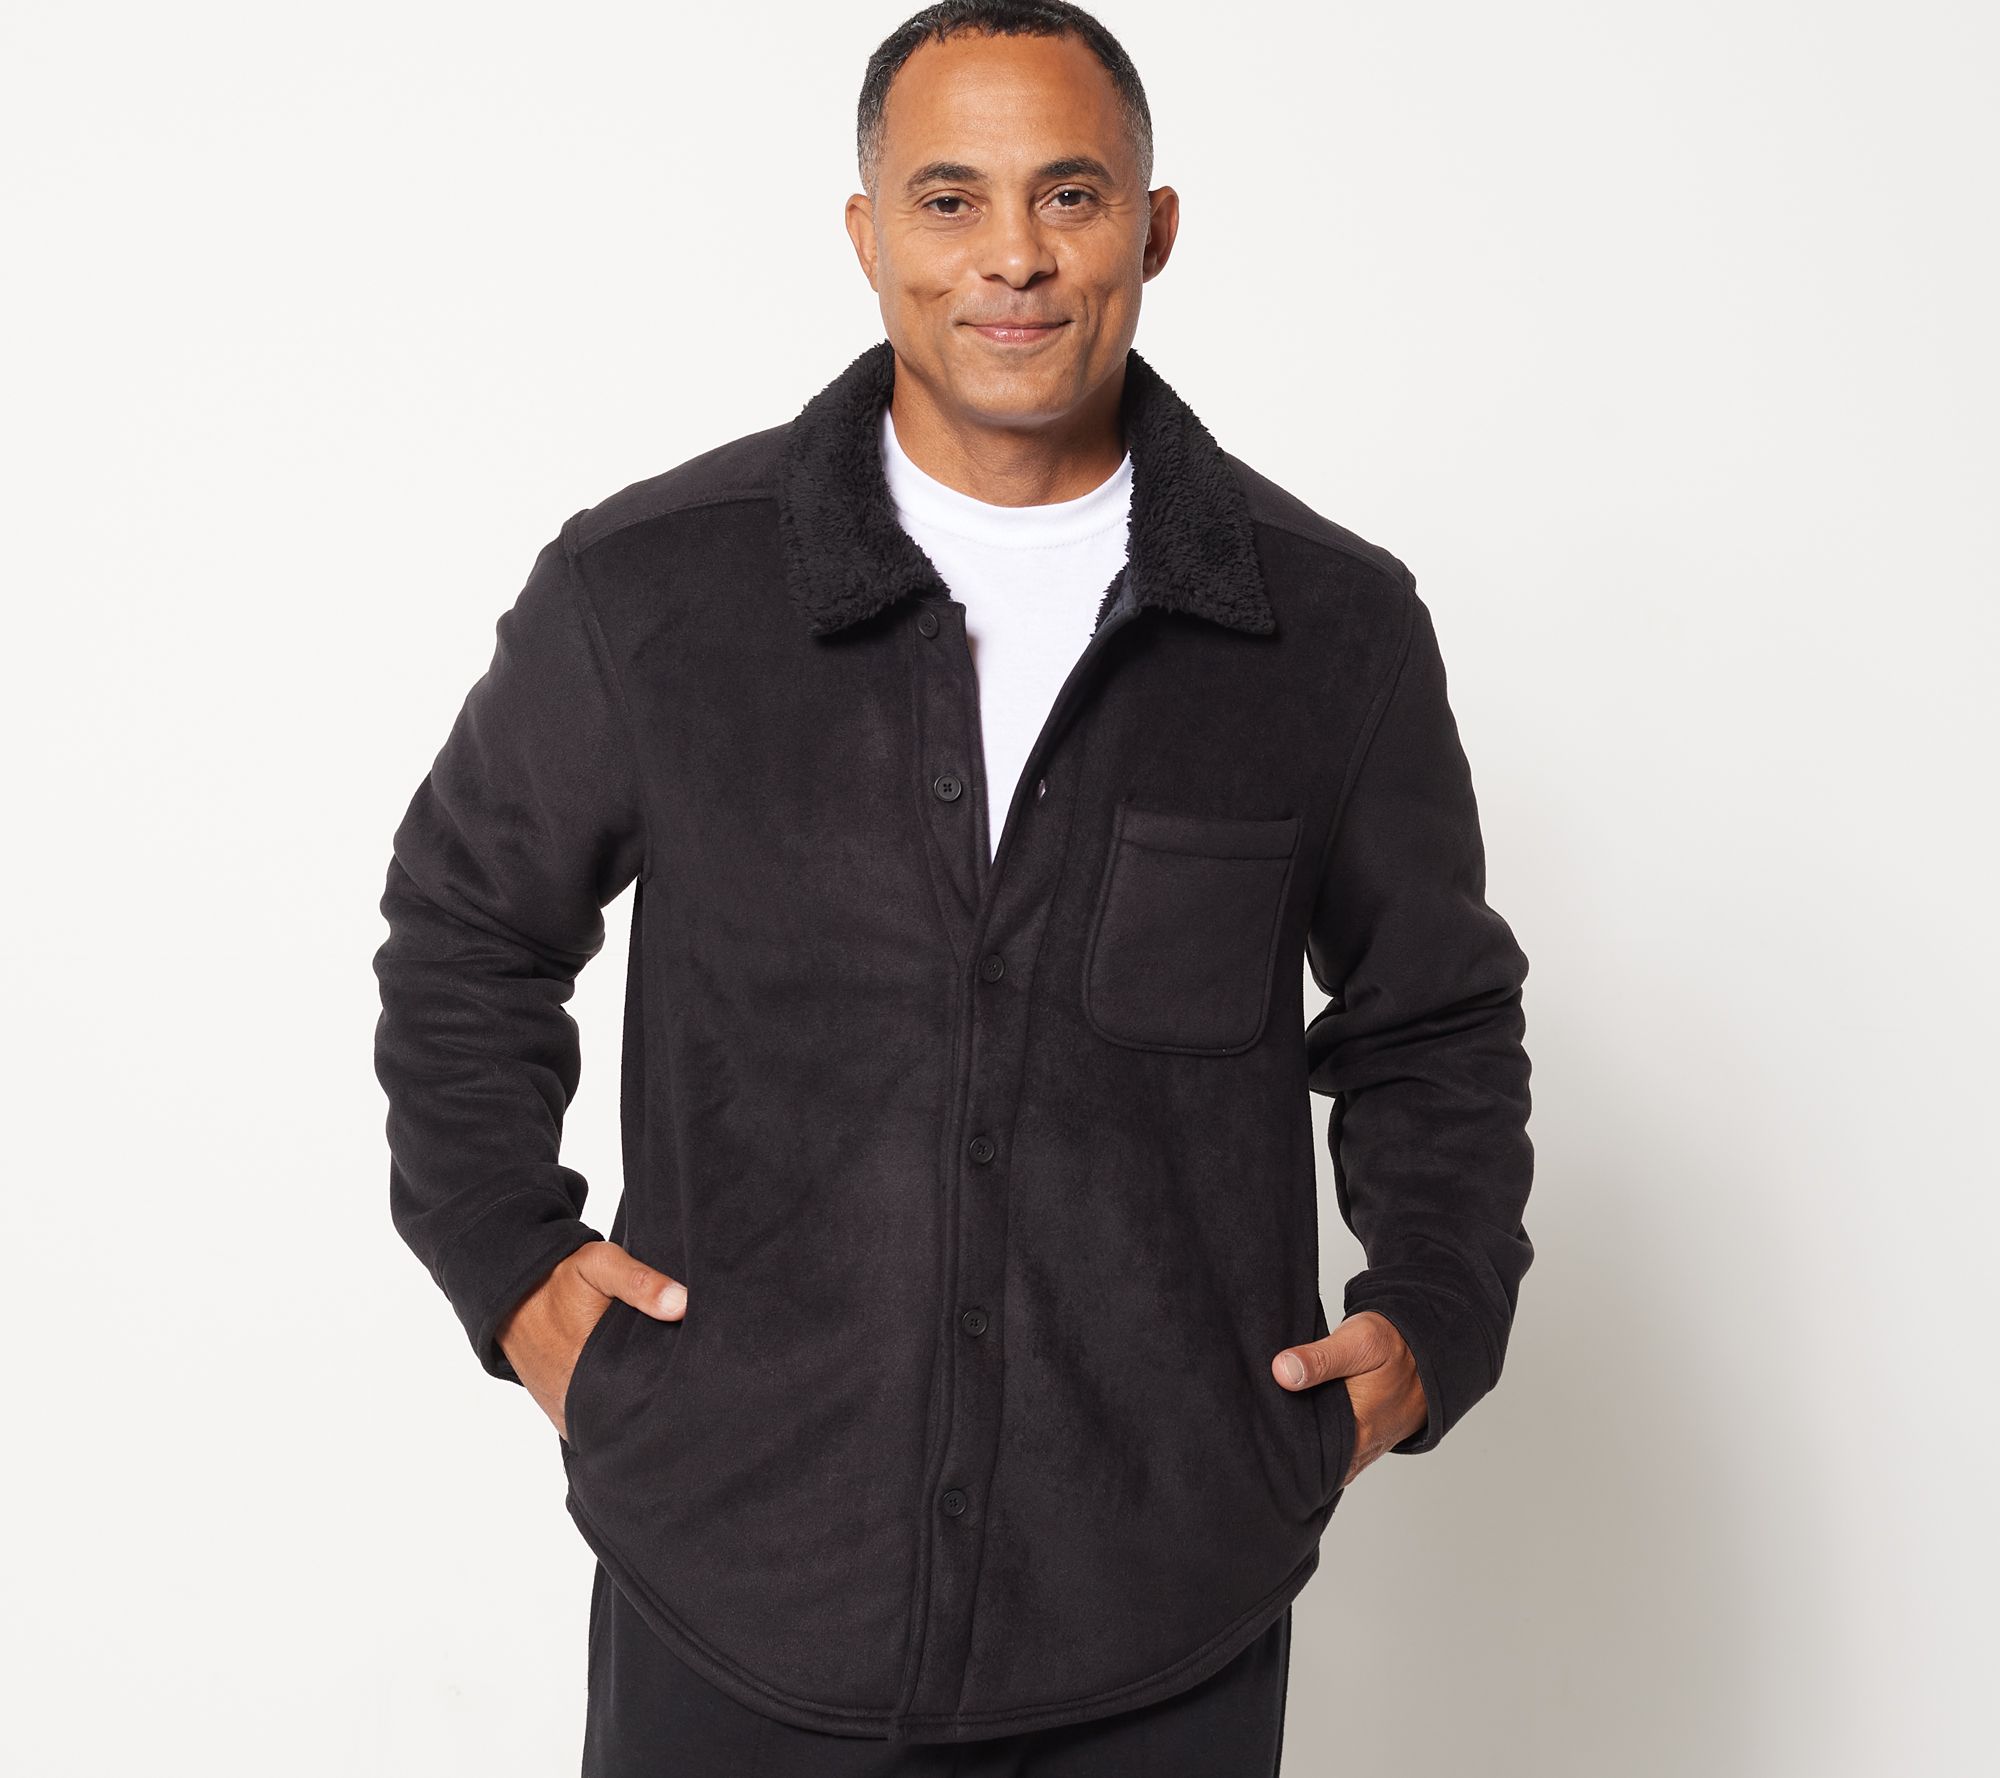 Clothing & Shoes - Tops - Shirts & Blouses - Cuddl Duds Flannel Fleece Half  Zip Shirt - Online Shopping for Canadians